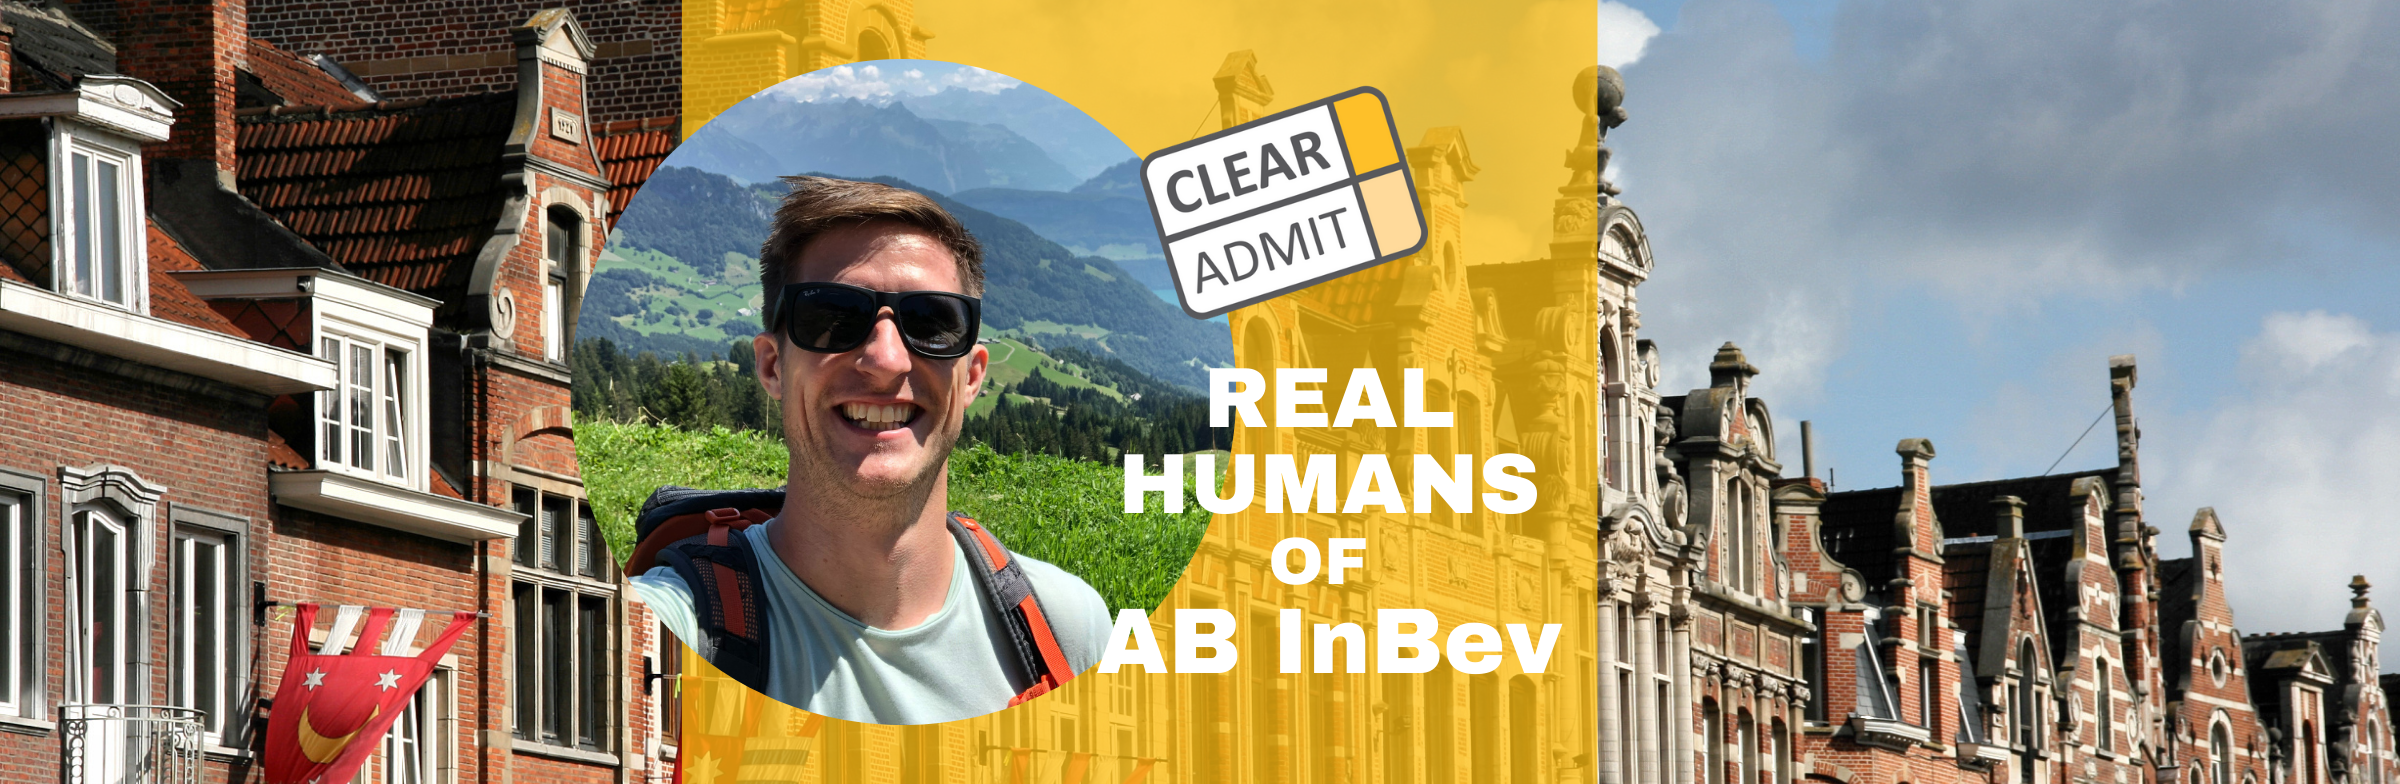 Image for Real Humans of AB InBev: Alex Roussel, London Business School ‘20, Global People Manager